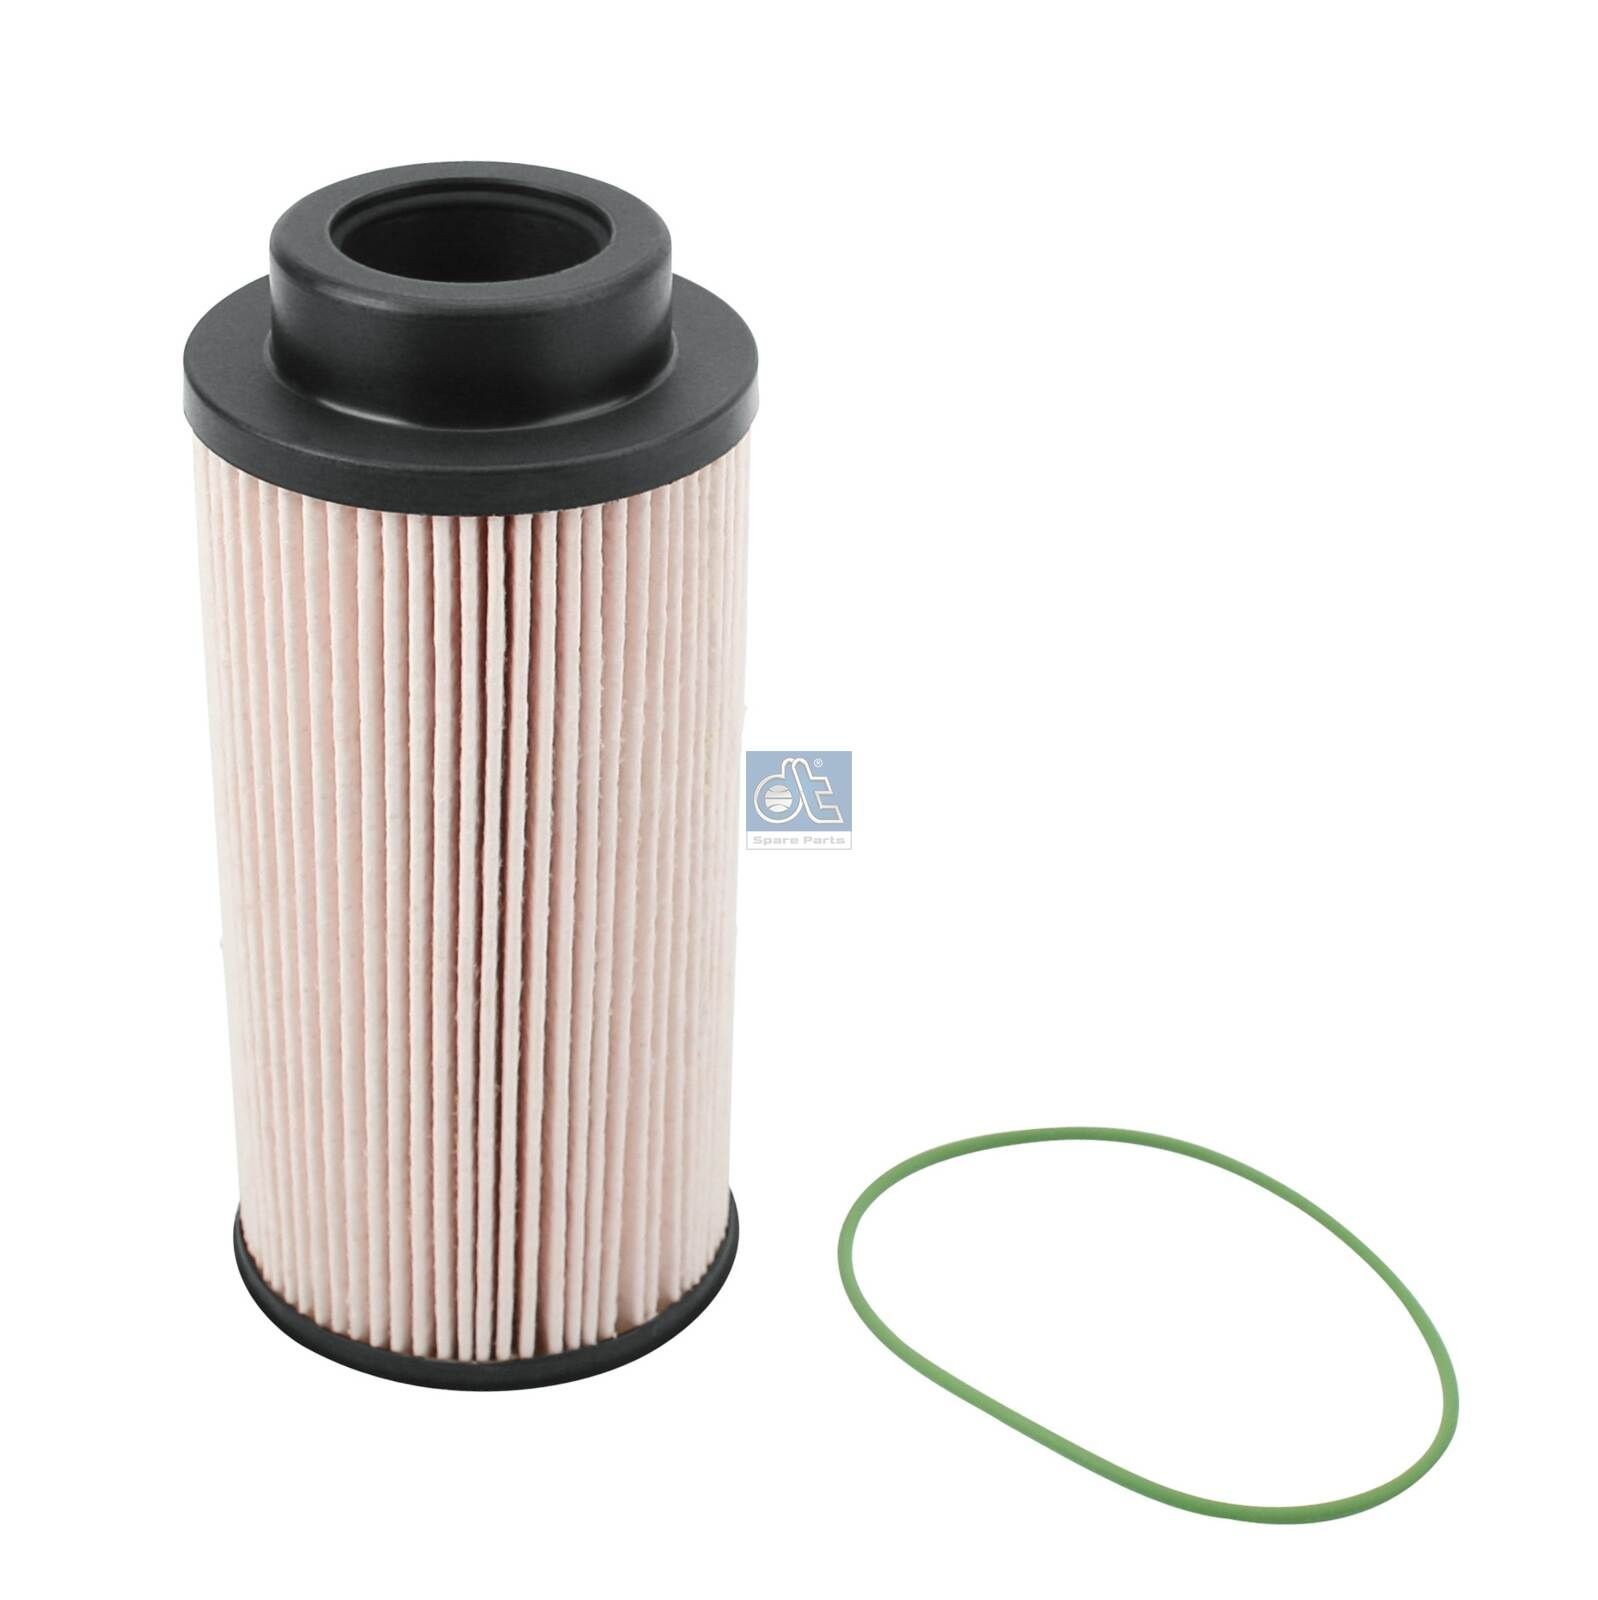 PU 941/1 x DT Spare Parts 1.12273 Fuel filter 1873 016